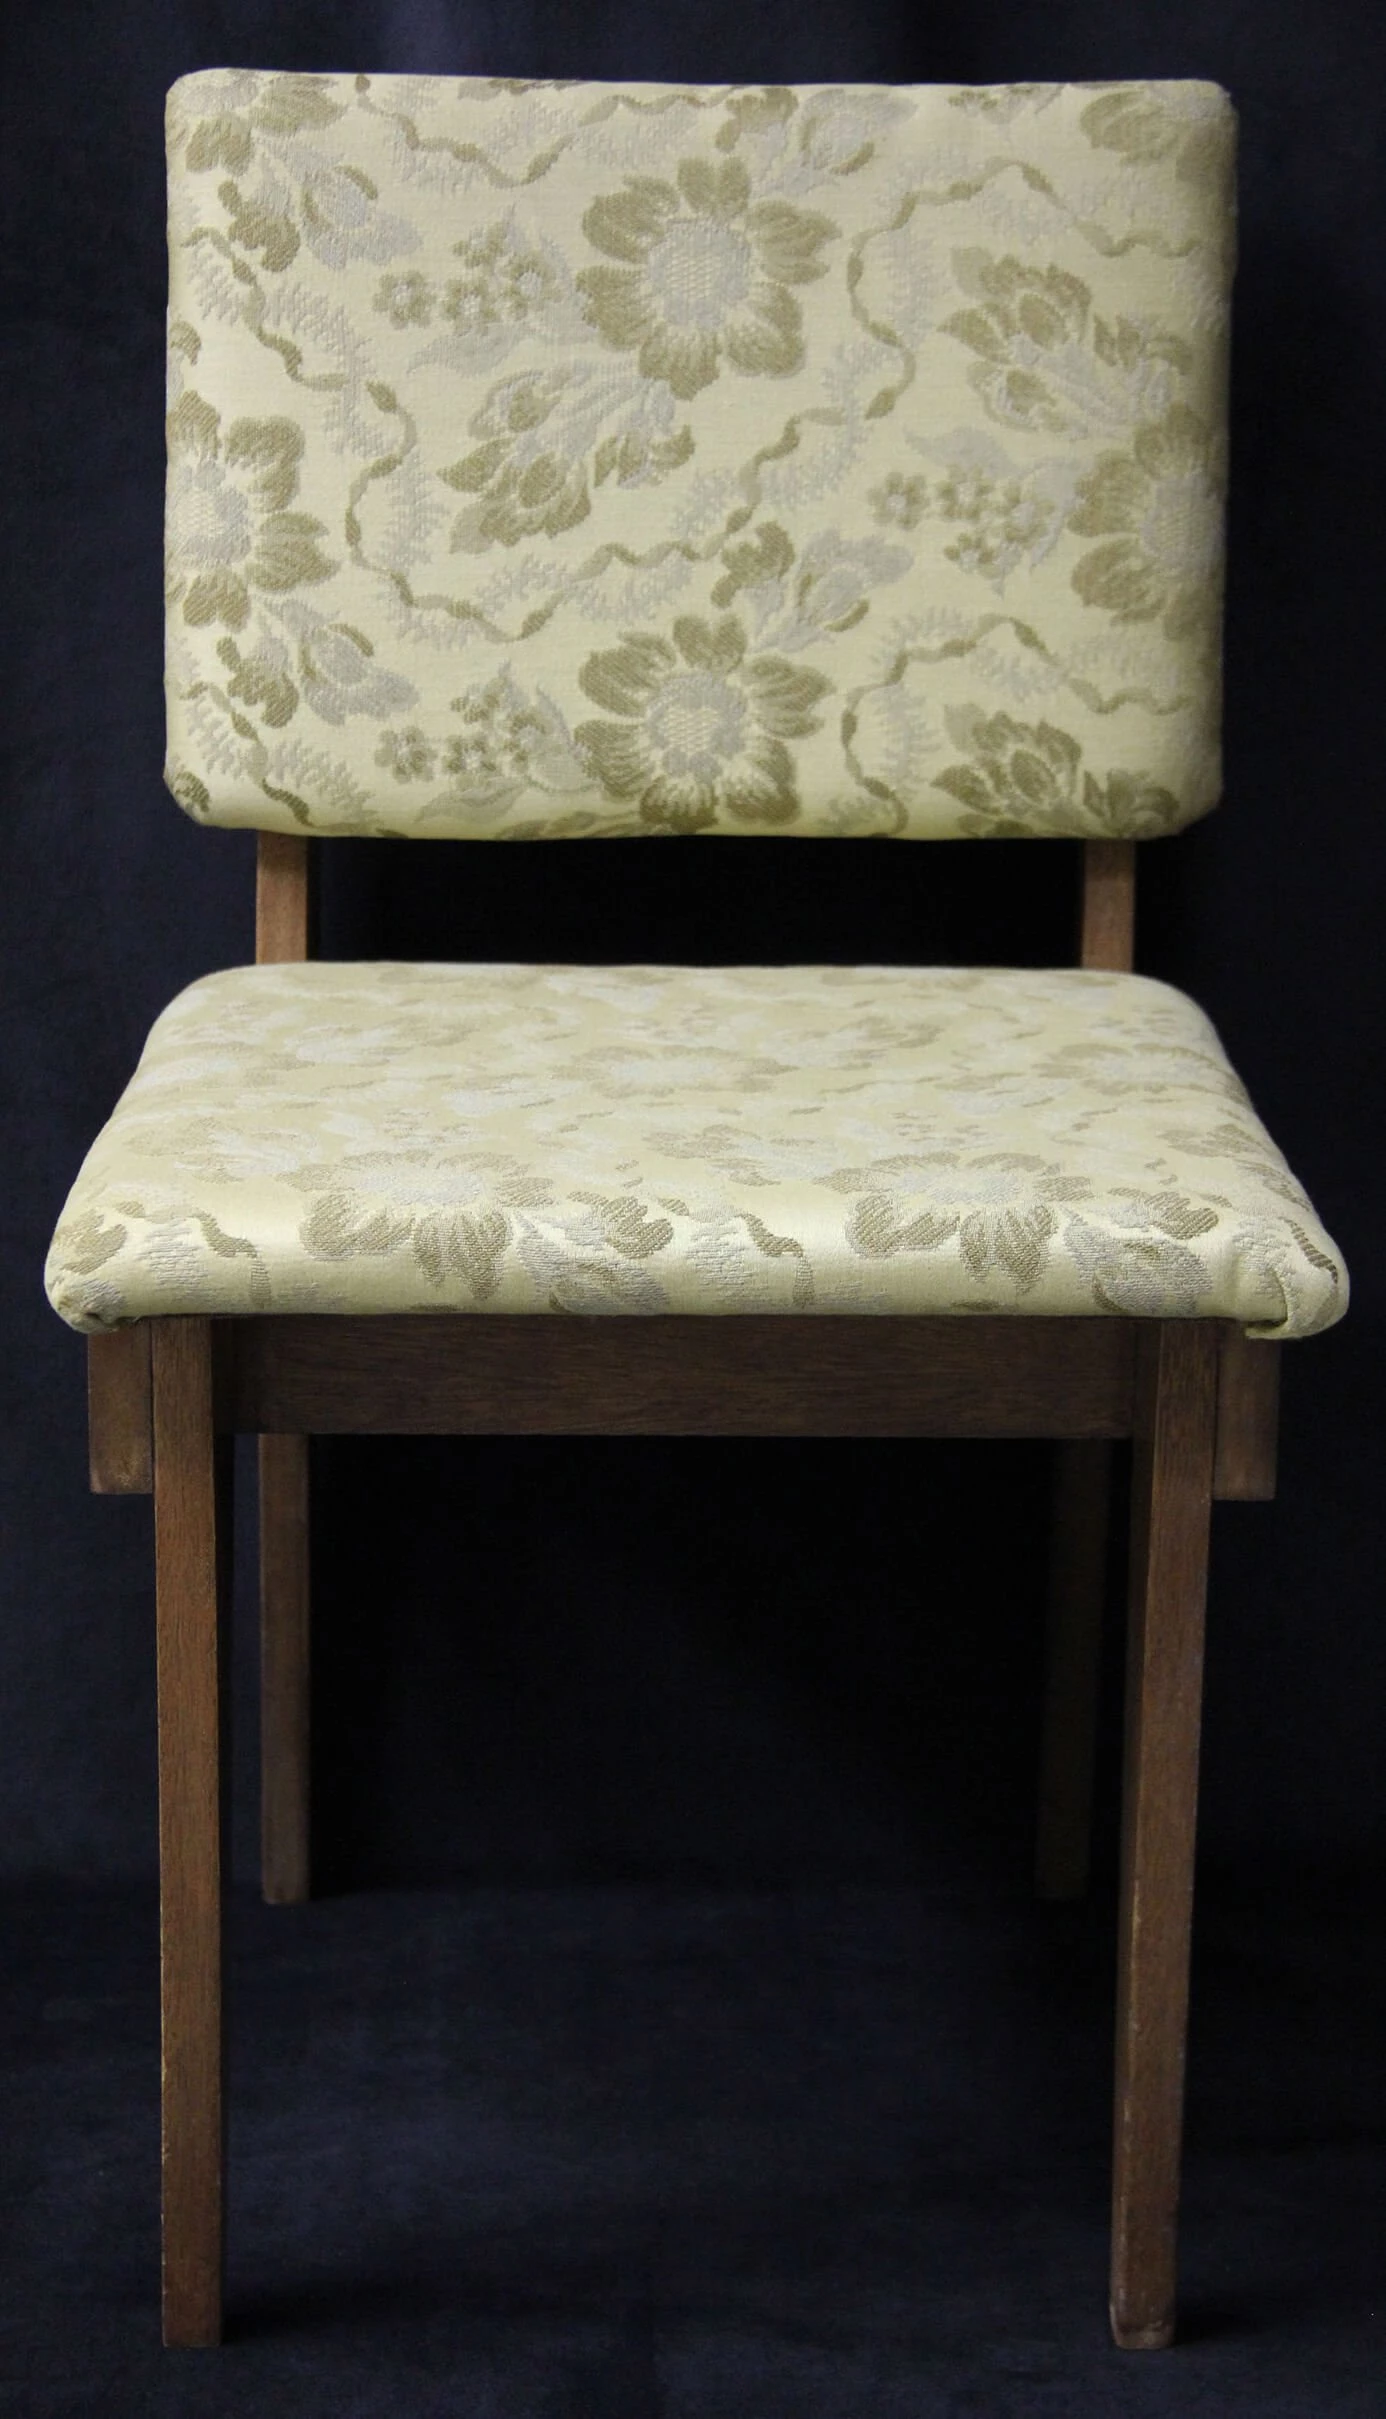 Photo of a wooden chair with a floral fabric seat and back.